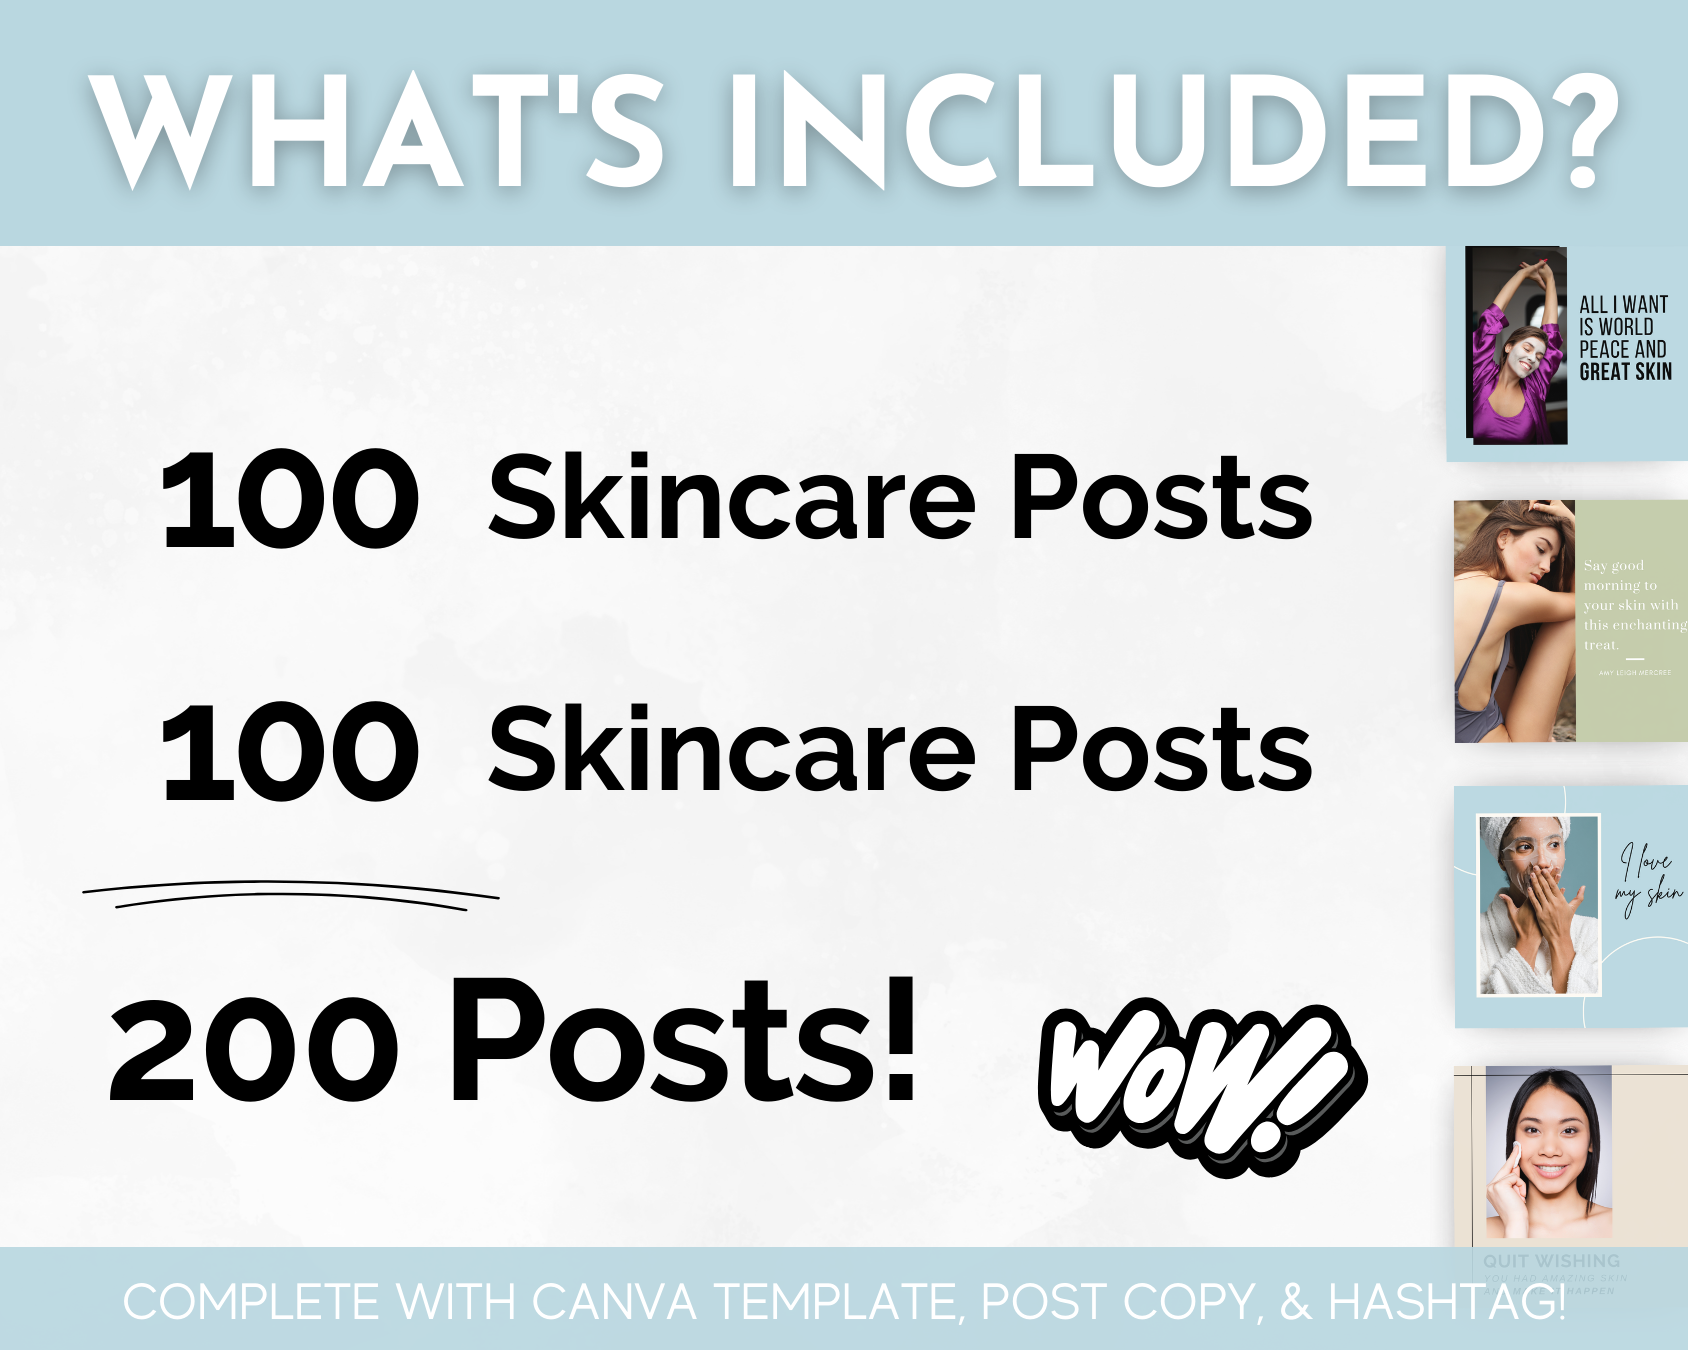 What's included - 100 Skincare Social Media Post Bundle with Canva Templates by Socially Inclined.